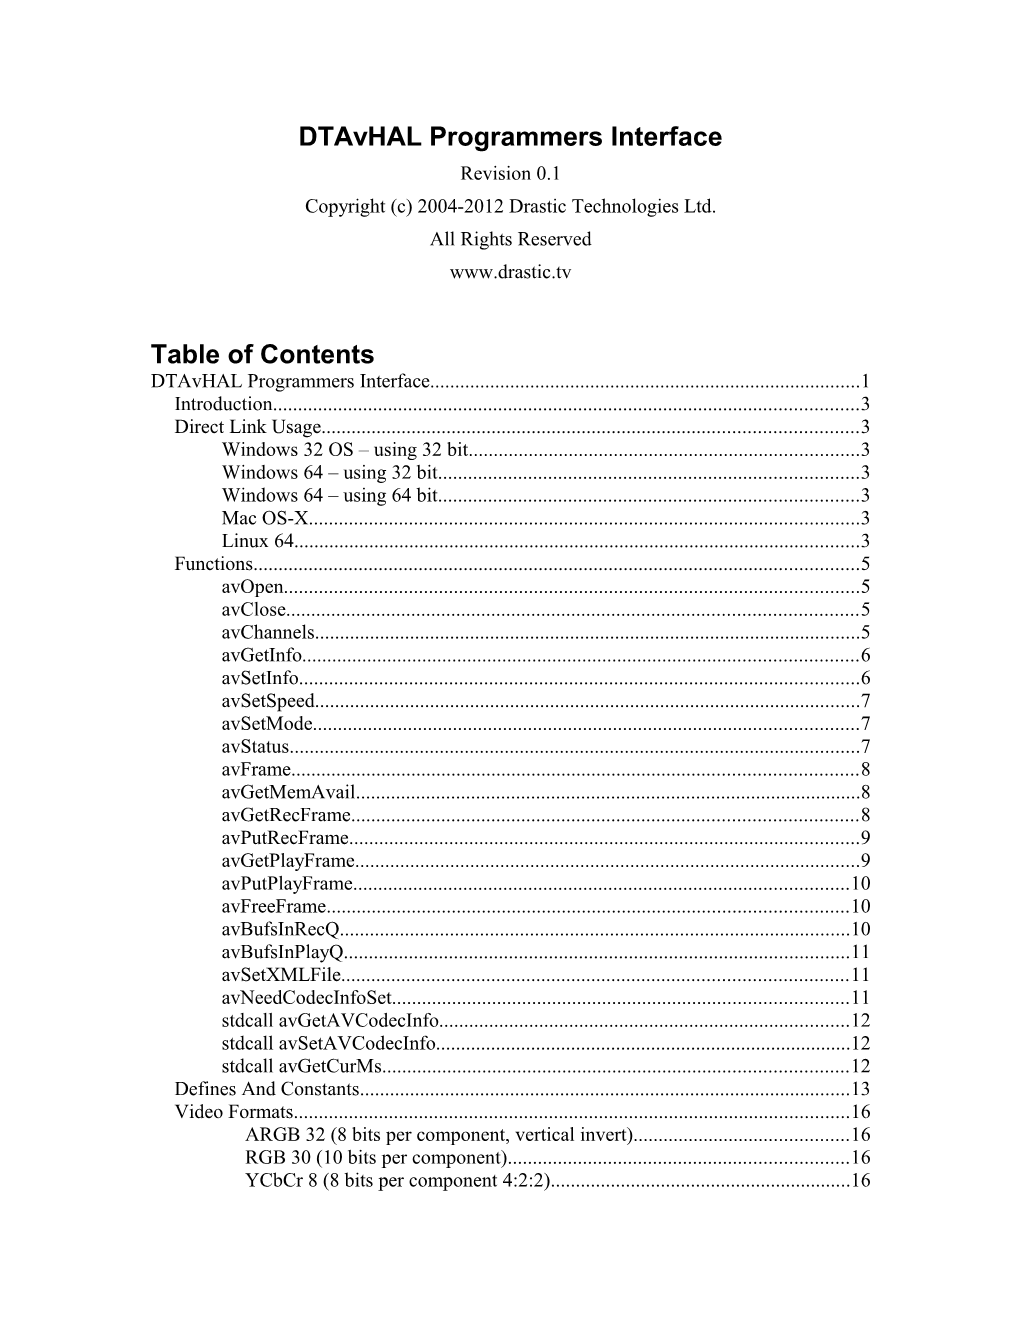 Dtavhal Programmers Interface Table of Contents